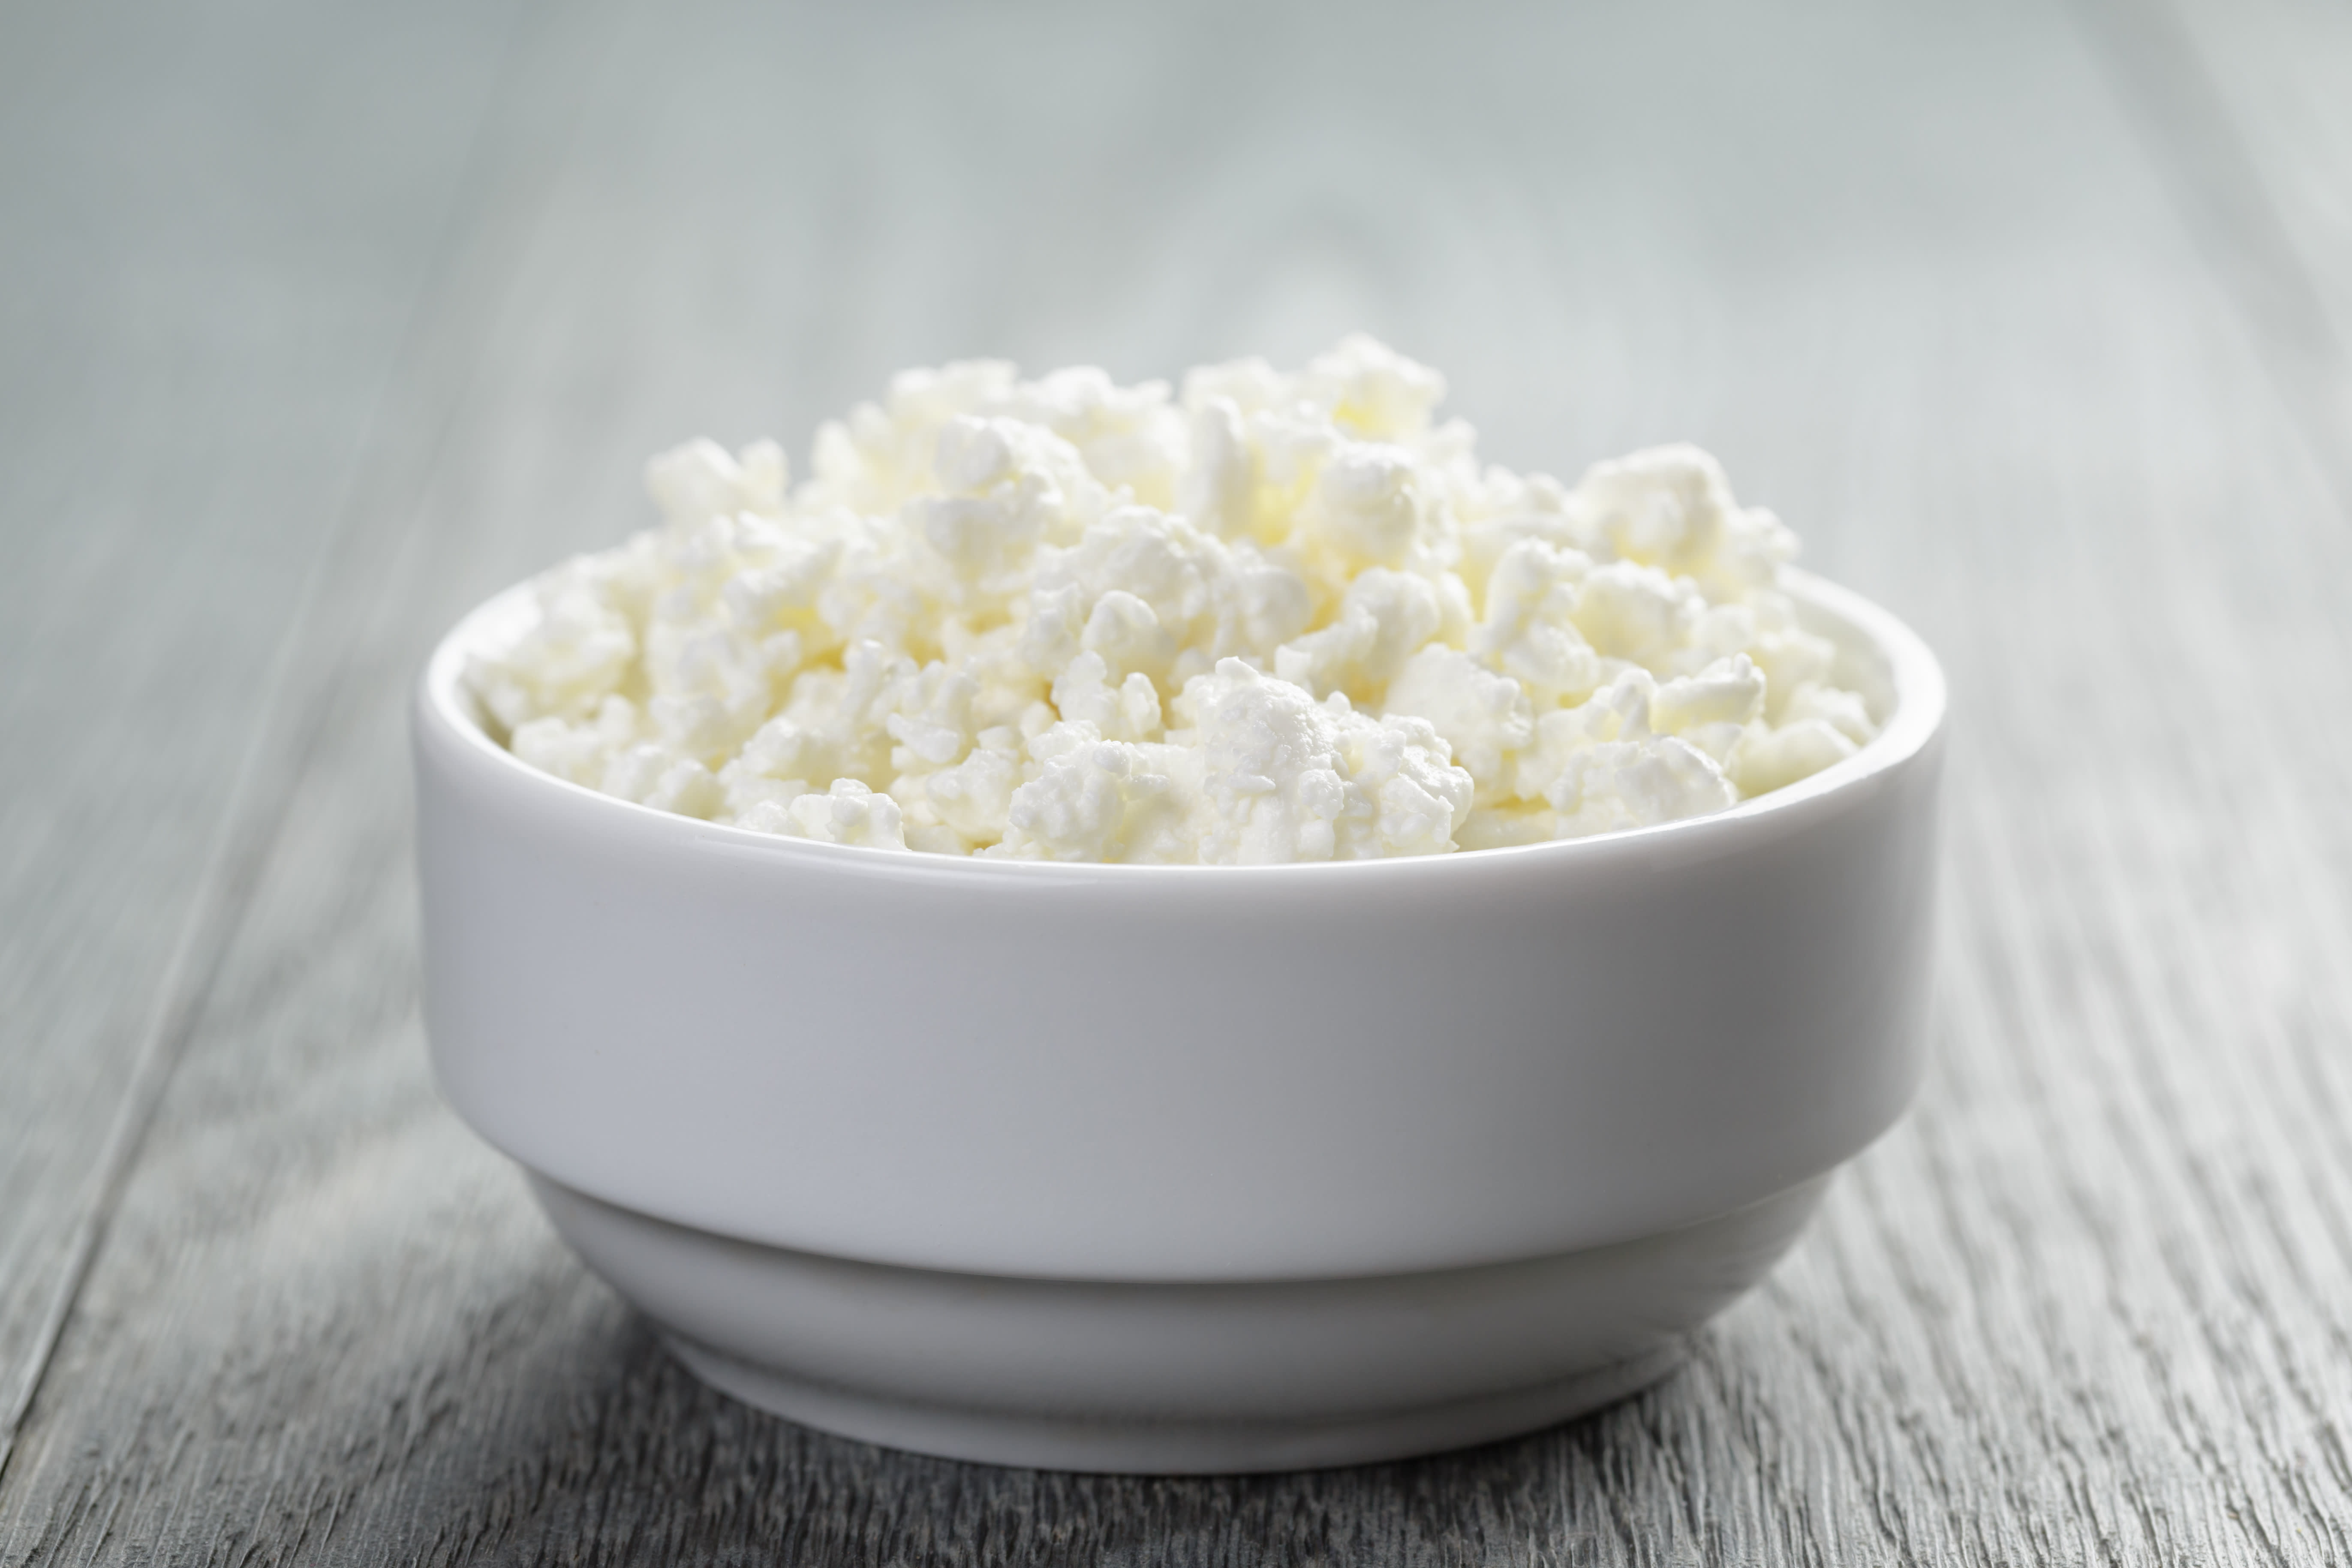 Dish of cottage cheese - Free Stock Image